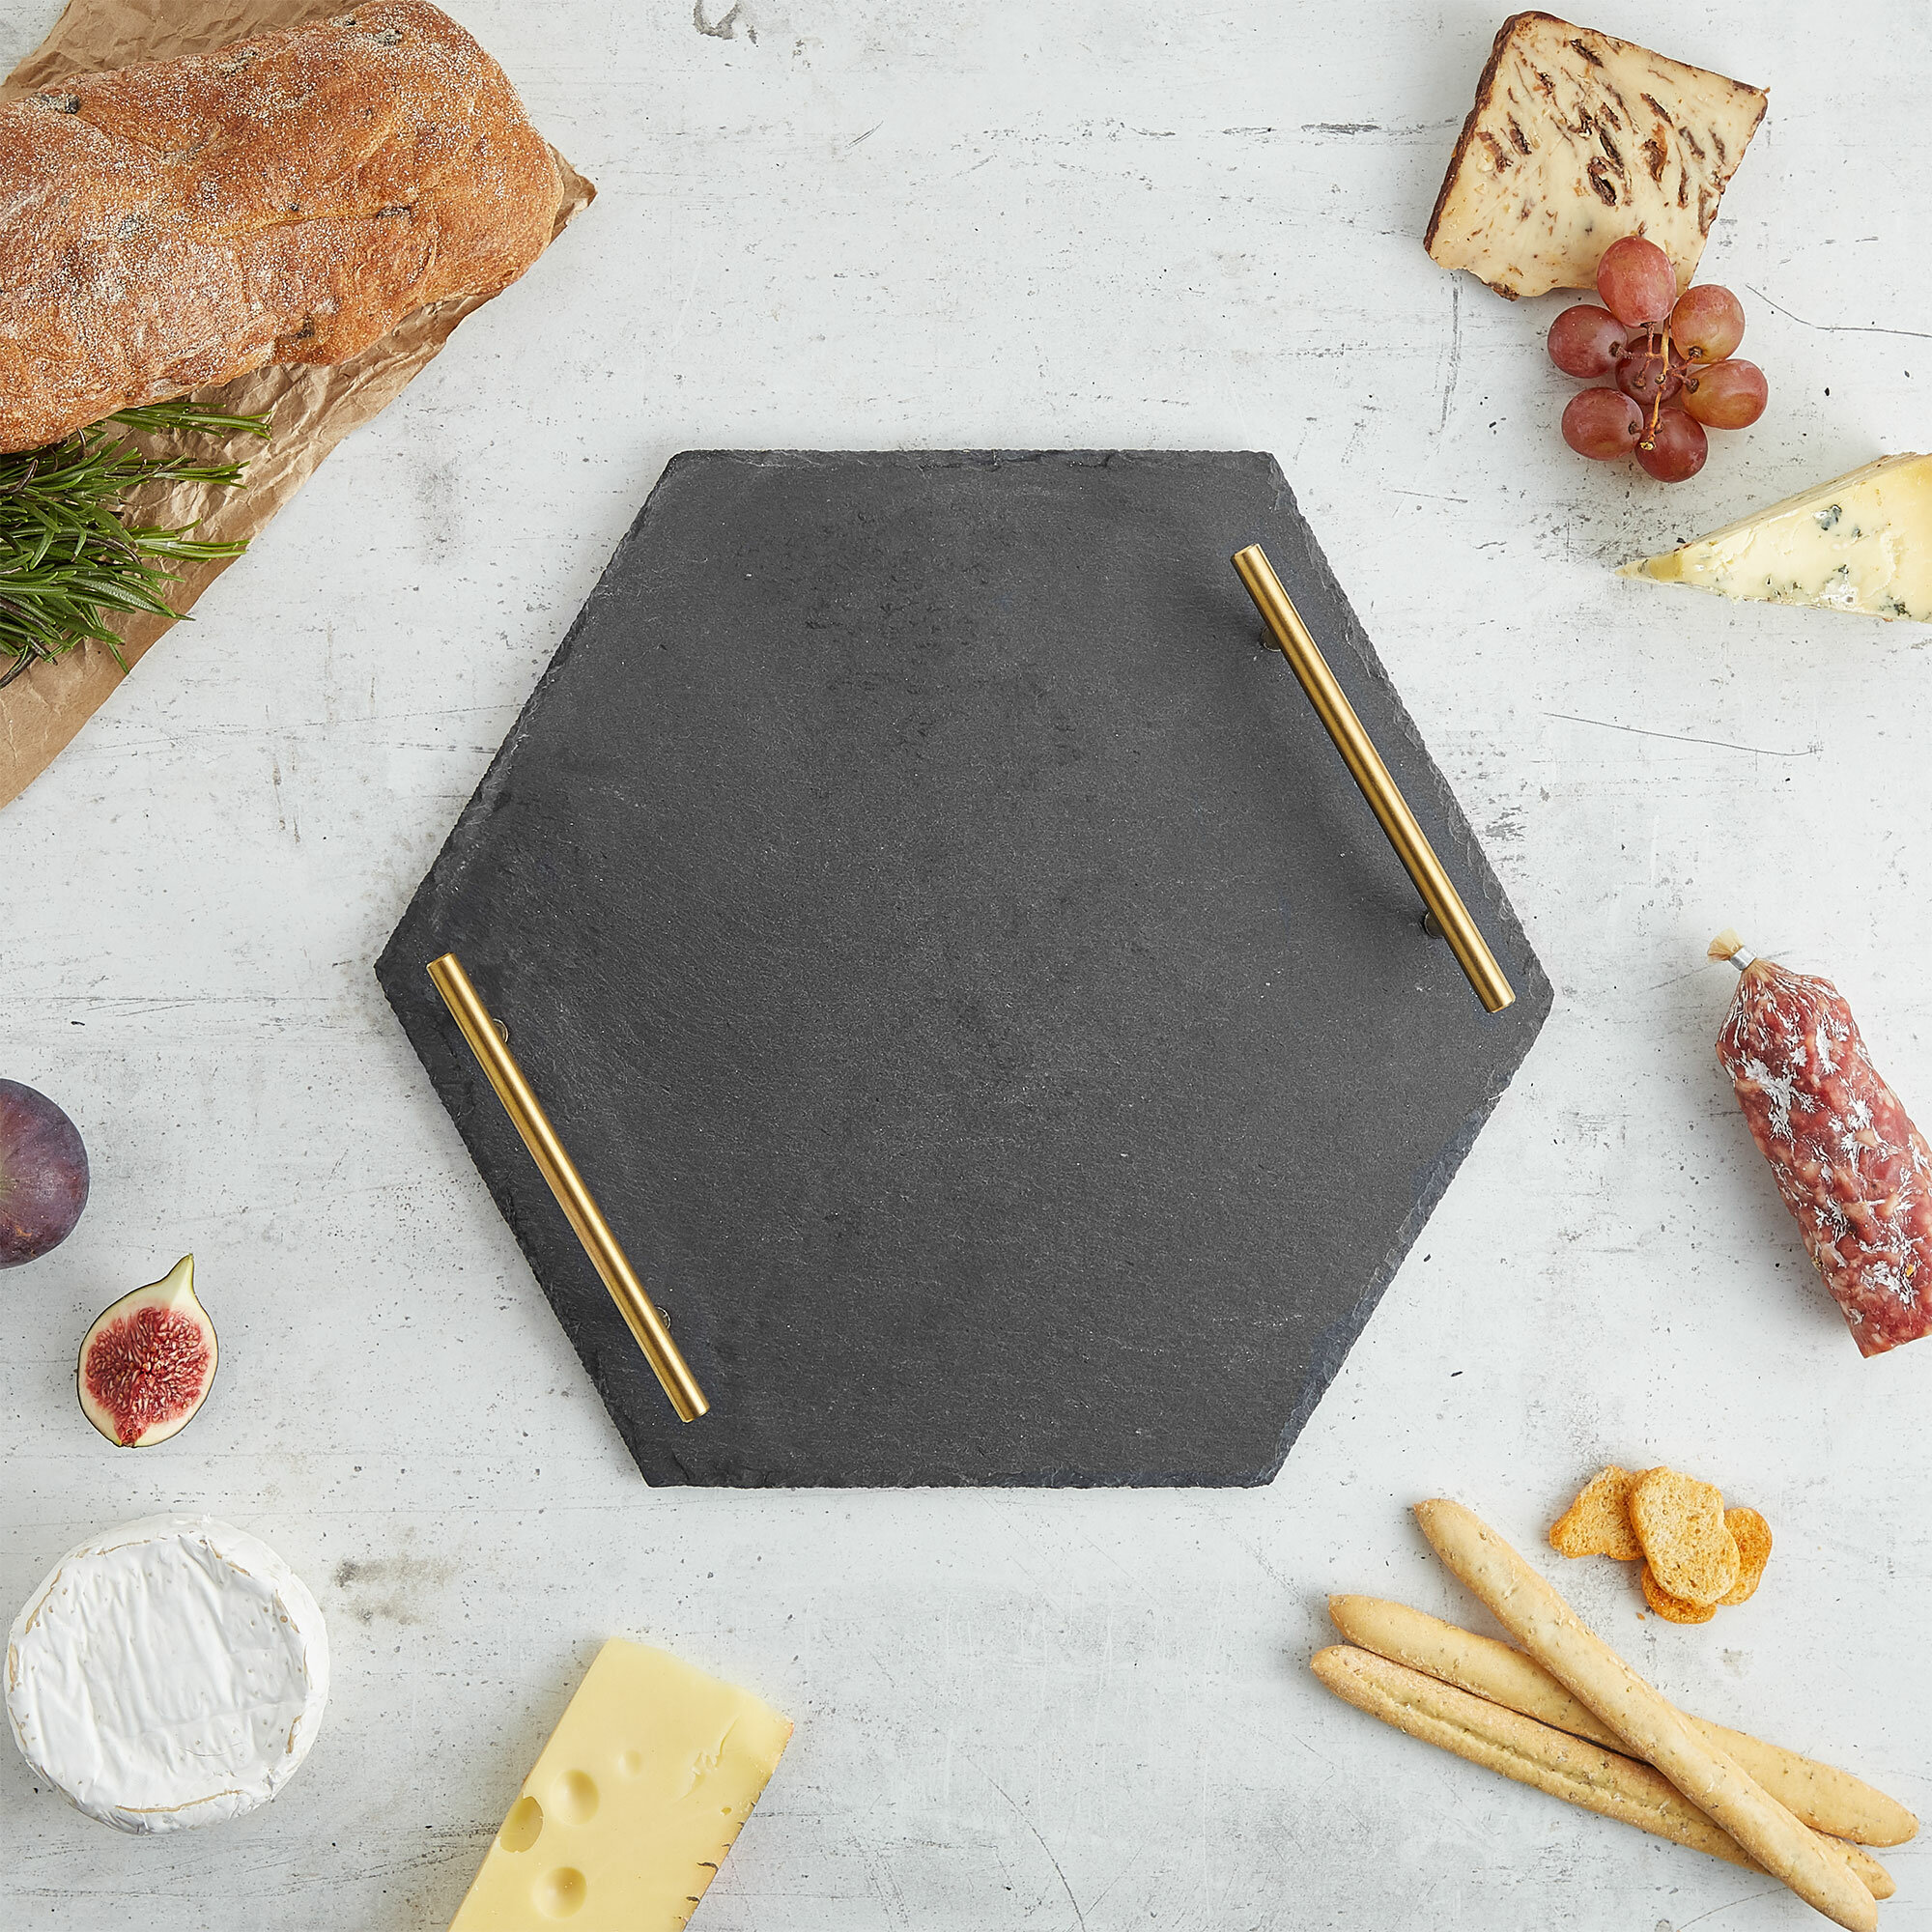 Perfect for Cheese Set of 6 8.7 x 6.3 Cheese Boards/Platters/Plates Desserts Tapas VonShef Slate Serving Tray Set